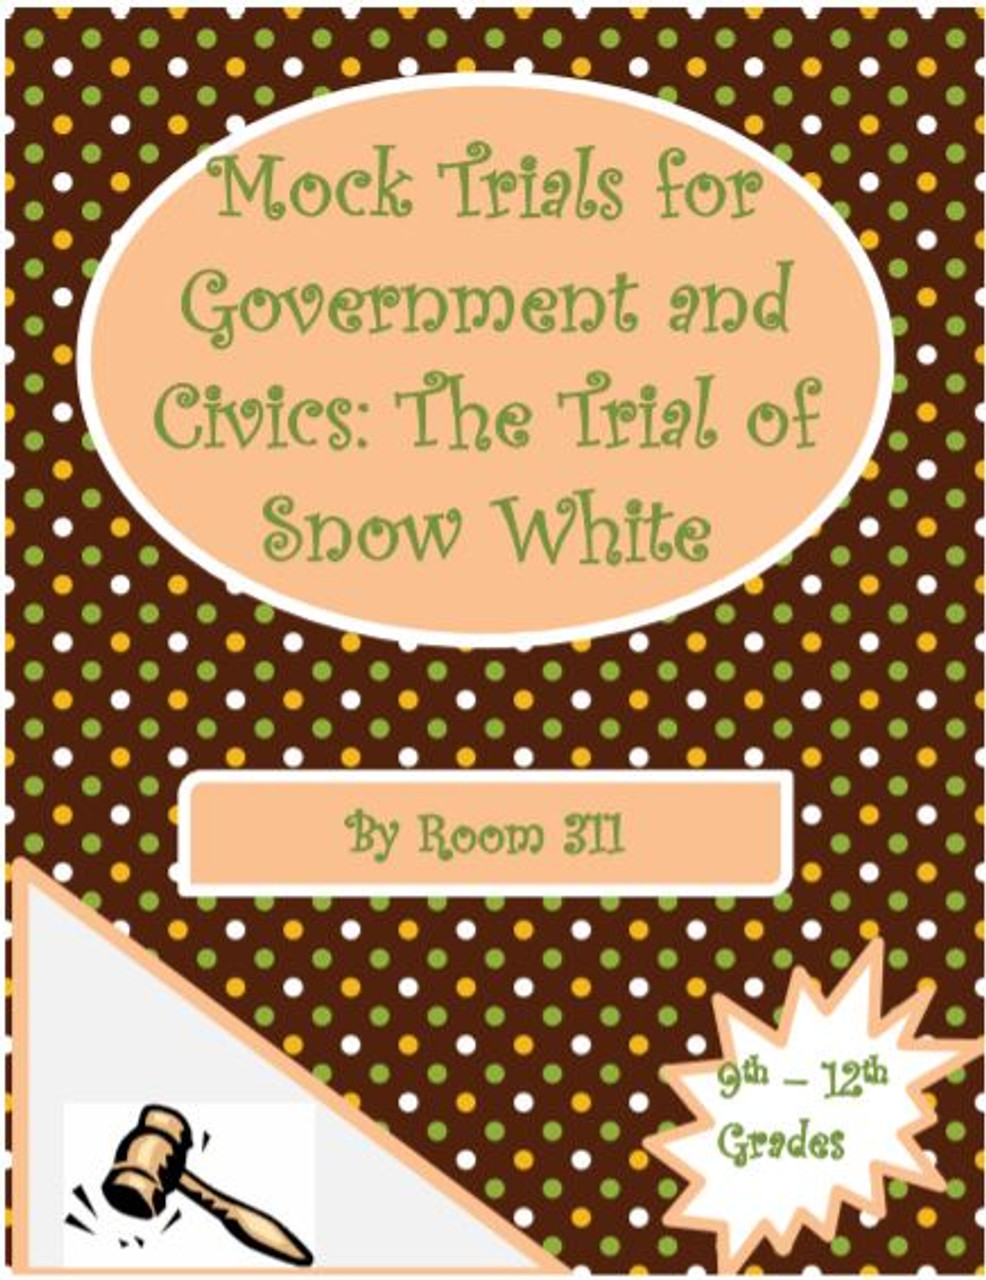 Mock Trials for Government and Civics: The Trial of Snow White